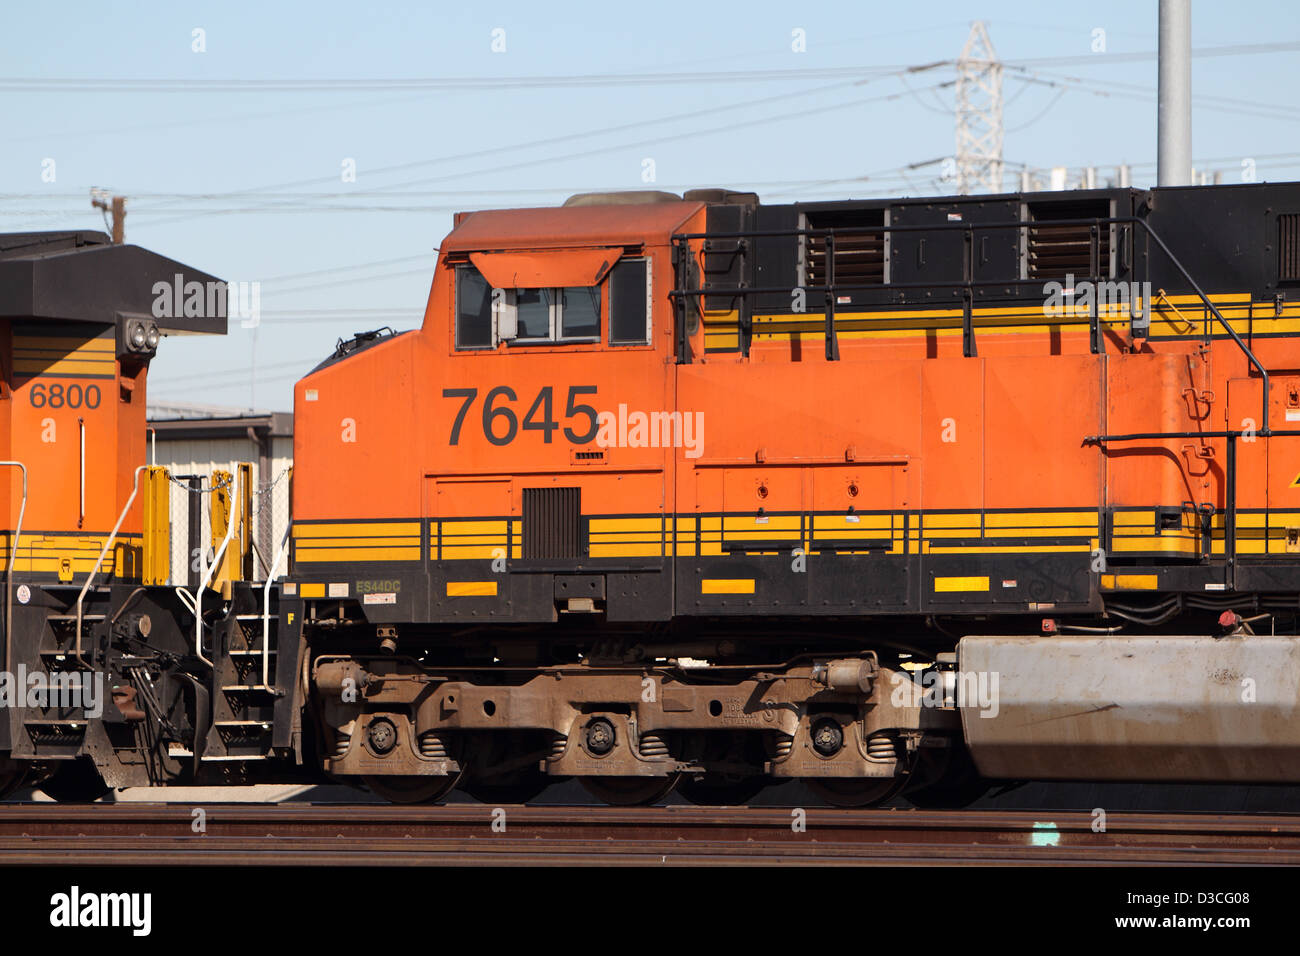 BNSF Locomotove 7645 parked on tracks in the City of Vernon in California on February 12, 2013. ONLY AVAILABLE ON ALAMY Stock Photo